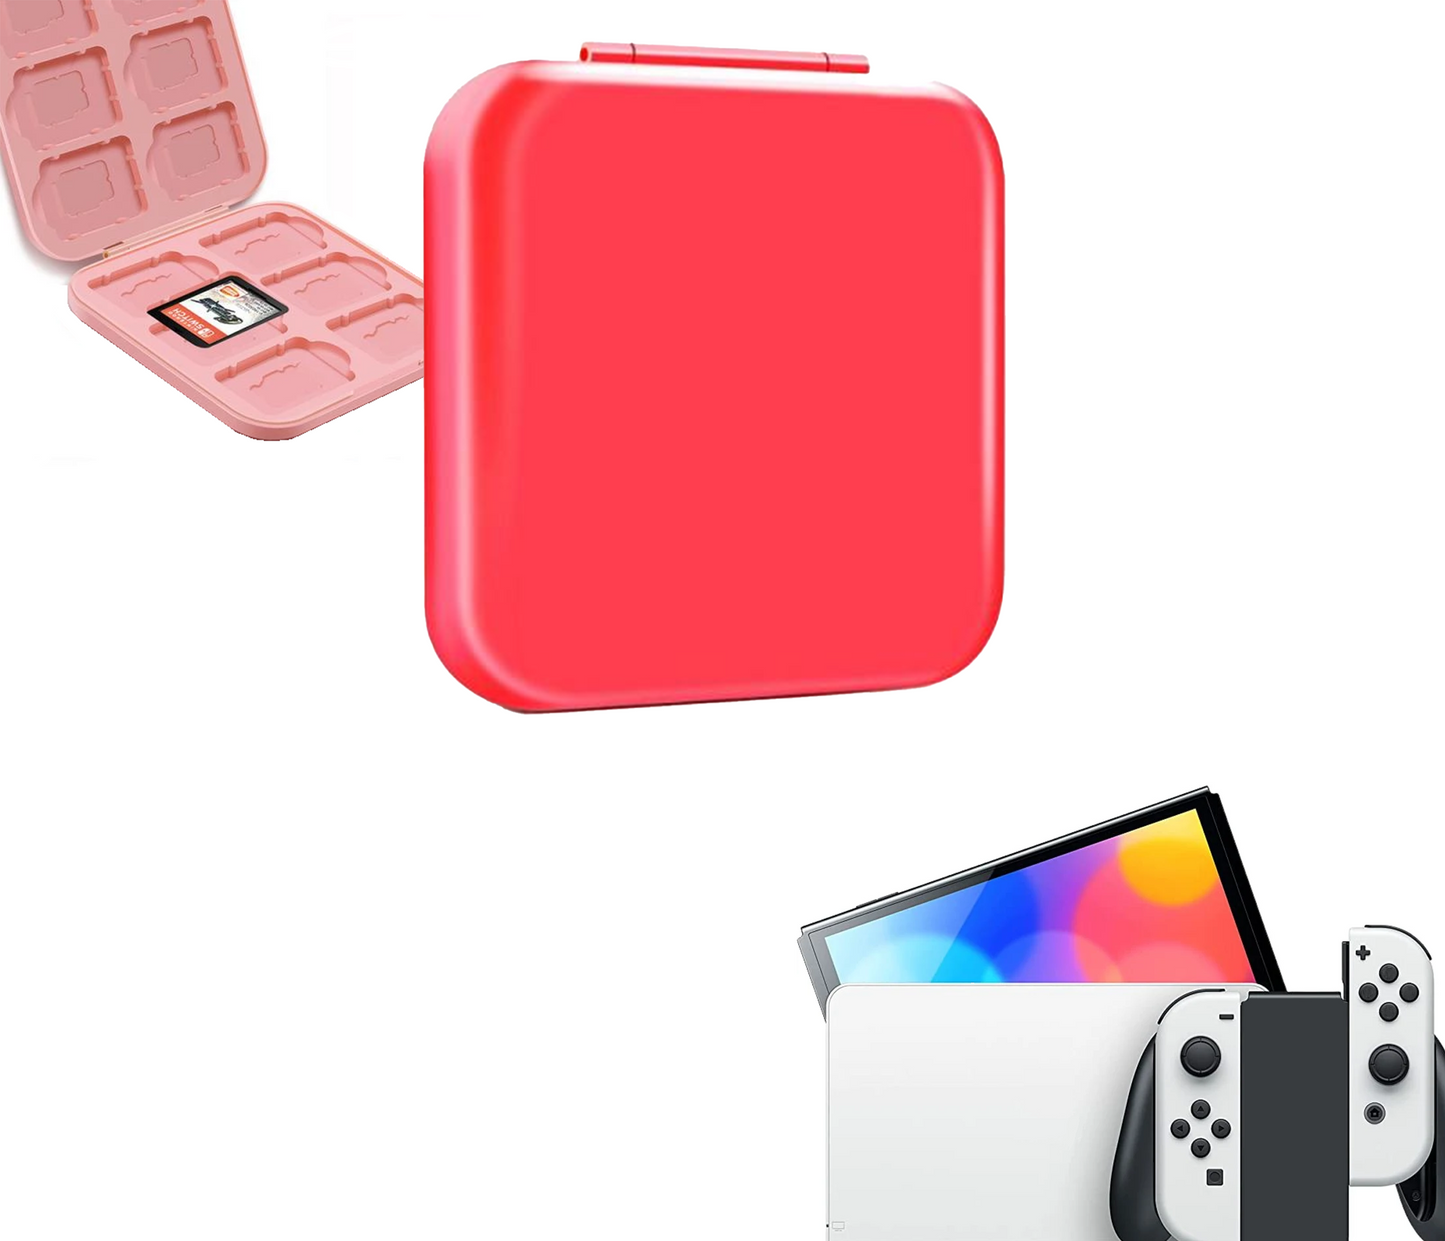 Cassette holder | Game holder | Storage box | Cassette box | Red | Accessories suitable for Nintendo Switch